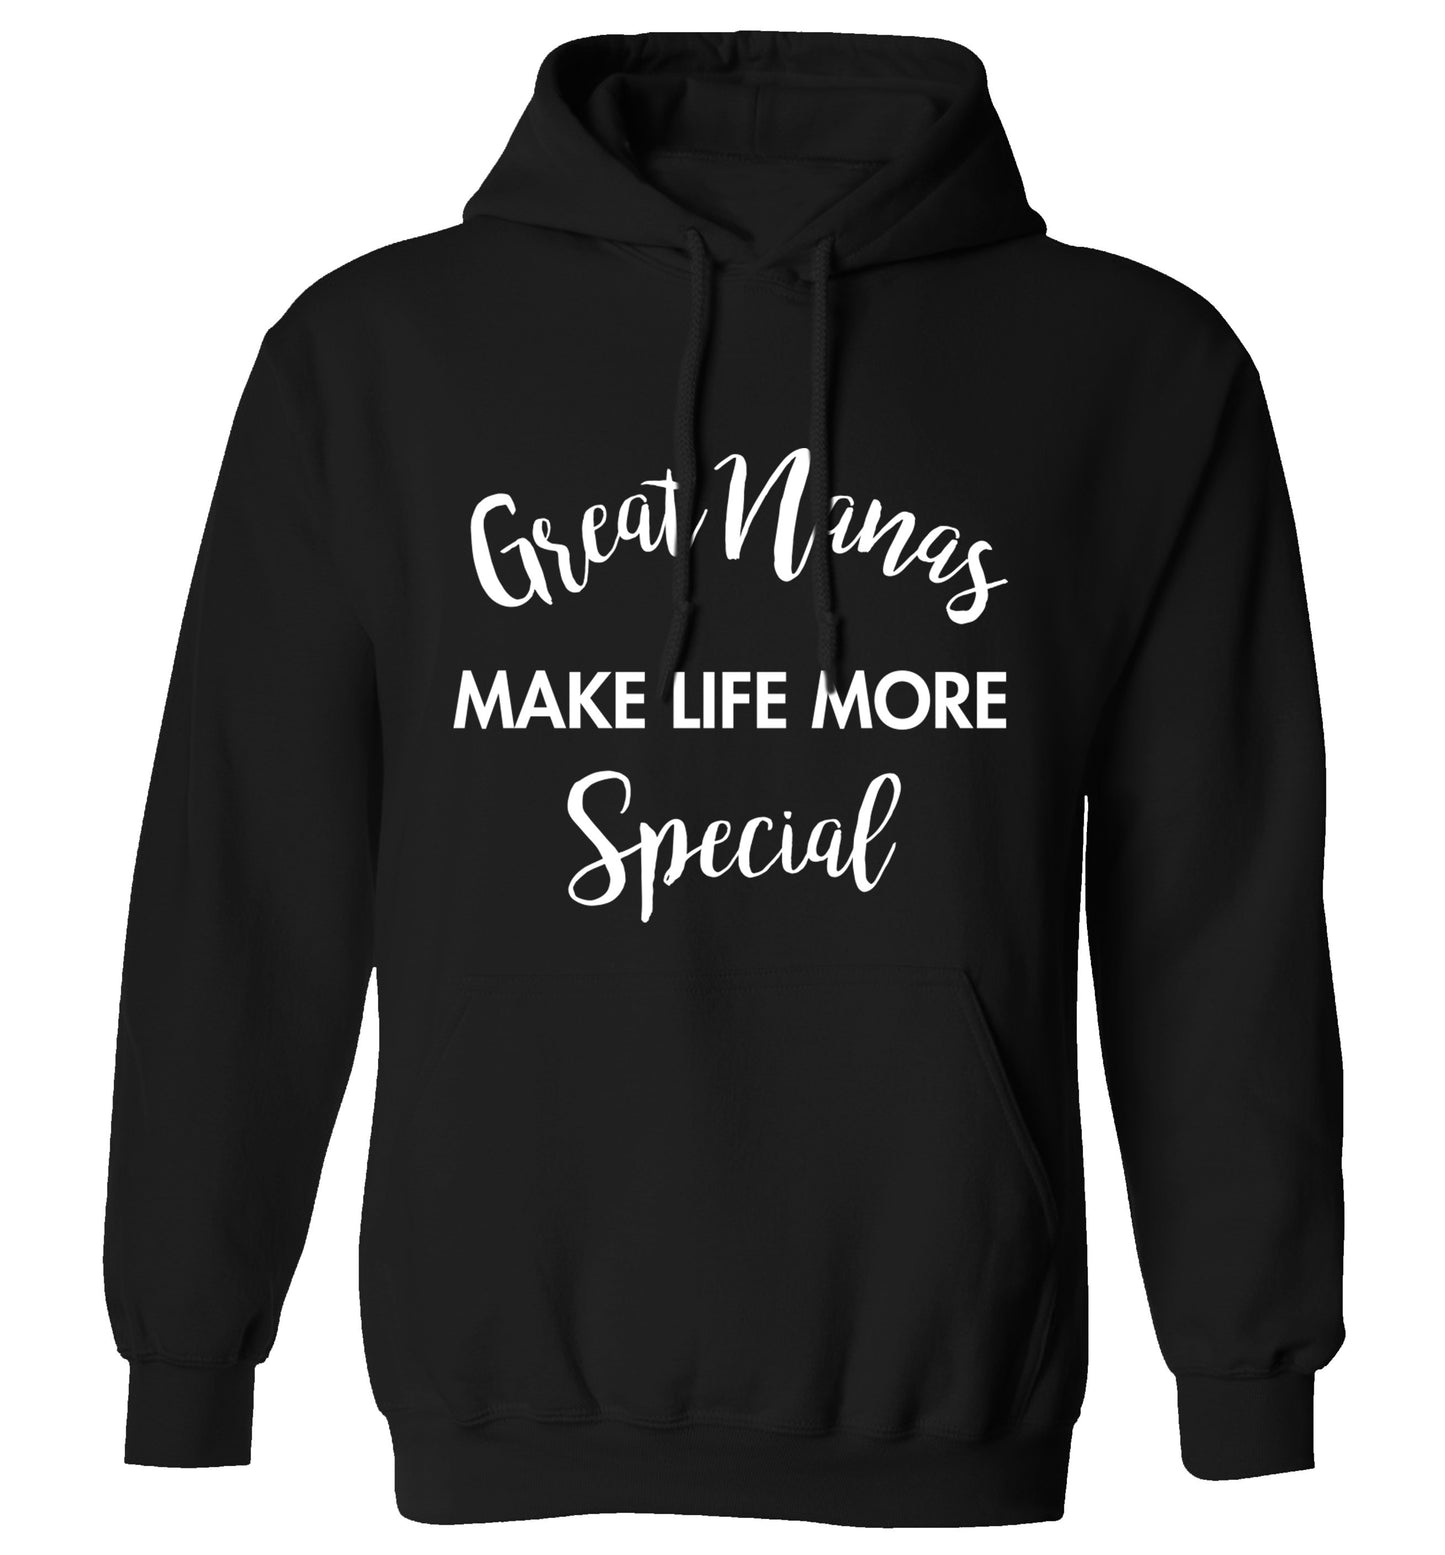 Great nanas make life more special adults unisex black hoodie 2XL